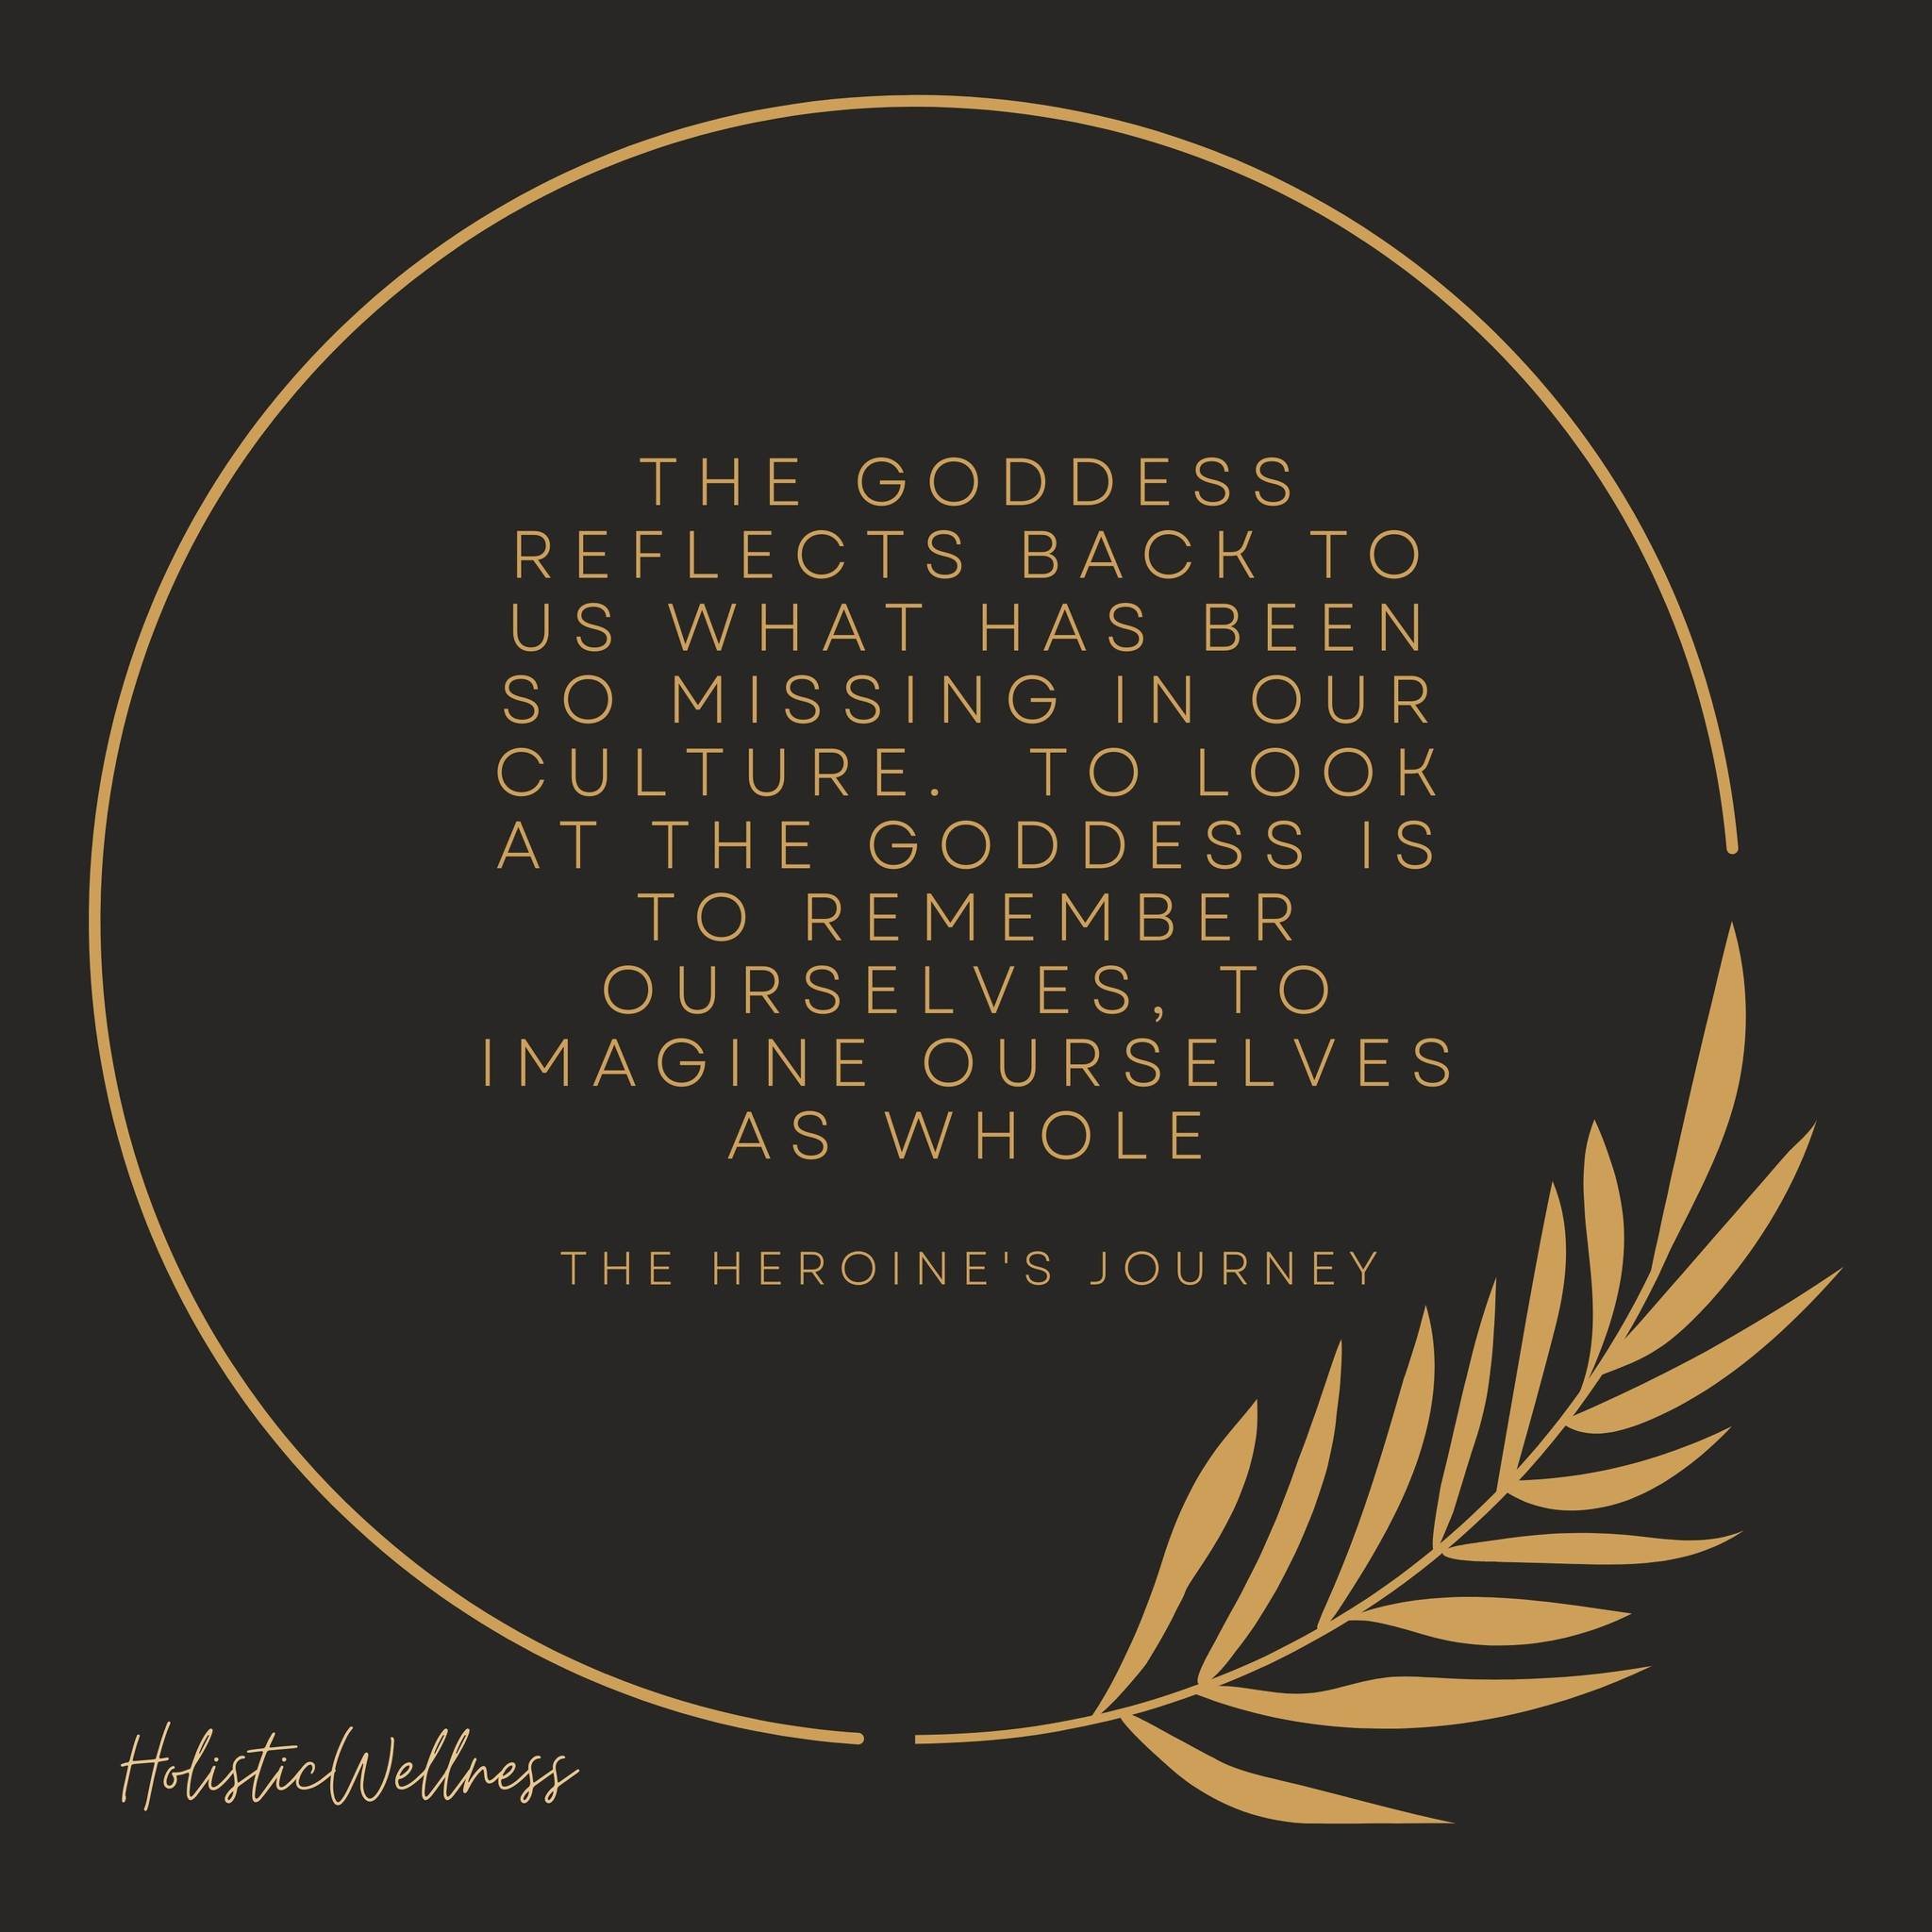 G O D D E S S 

To all you beautiful Goddesses⁣
⁣💫
Let us celebrate today all women, ourselves, our sisters, mothers, daughters, friends and foes and all those that came before, in honour of their Goddess nature and the collective potent feminine⁣
⁣